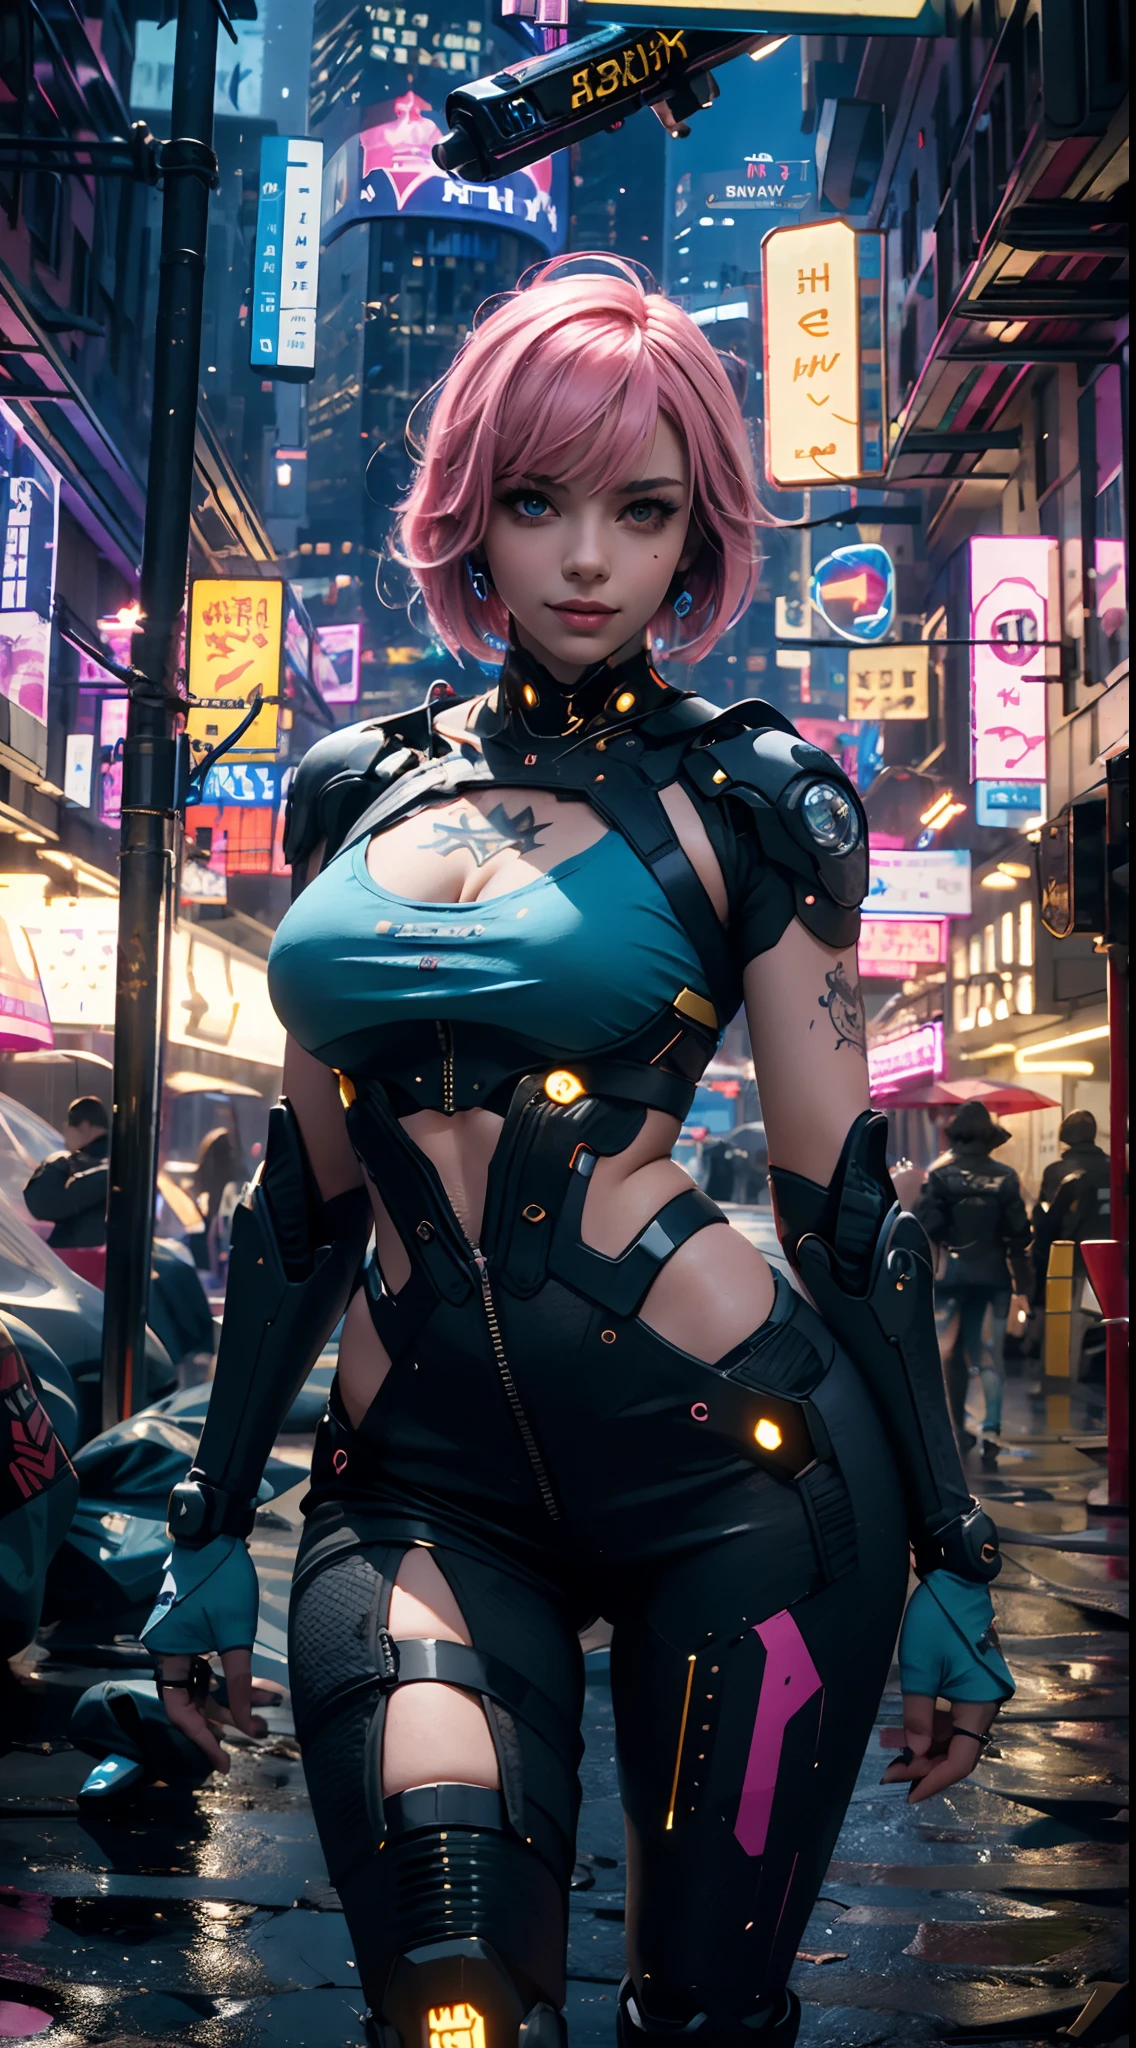 masterpiece, maximum quality, ultra high resolution, 8k, a girl,beauty,21years old,fair skin, extremely beautiful,strong gaze, alone,bust portrait,cyberpunk outfit, extremely detailed face, detailed eyes, mischievous smile, cheerful, realistic photo, totally realistic, human pelle, studio lighting,golden ratio body, wide hips,perfect legs, big ass,pink hair,blunt bangs,blue and white clothing,D-cup breasts,in the cyberpunk city,cyberpunk city background,((night)),rain,tattoos,Combat posture,cyborg,Mechanical mask